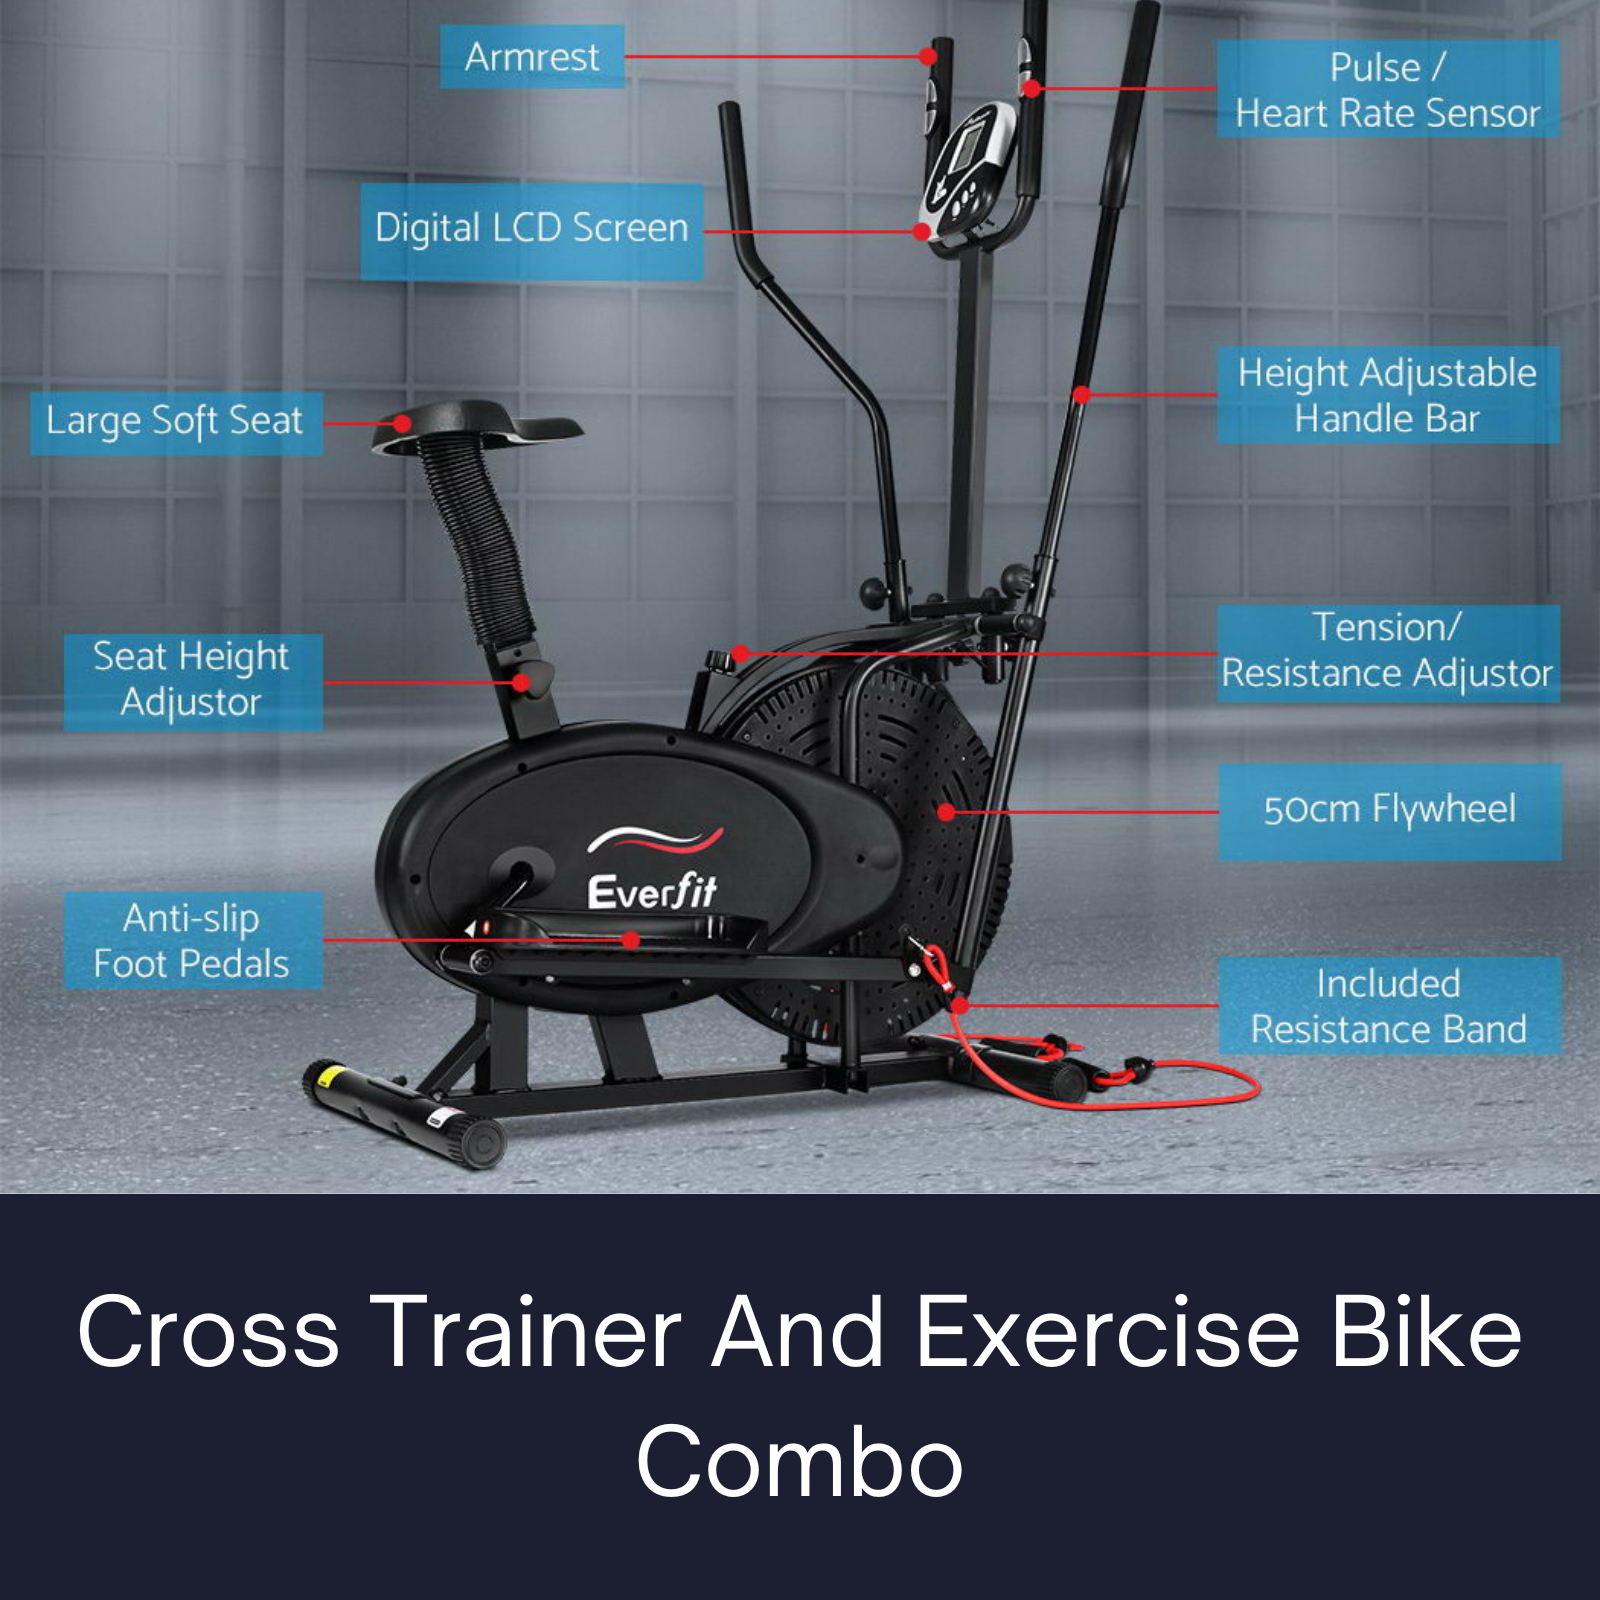 

Everfit Exercise Bike

